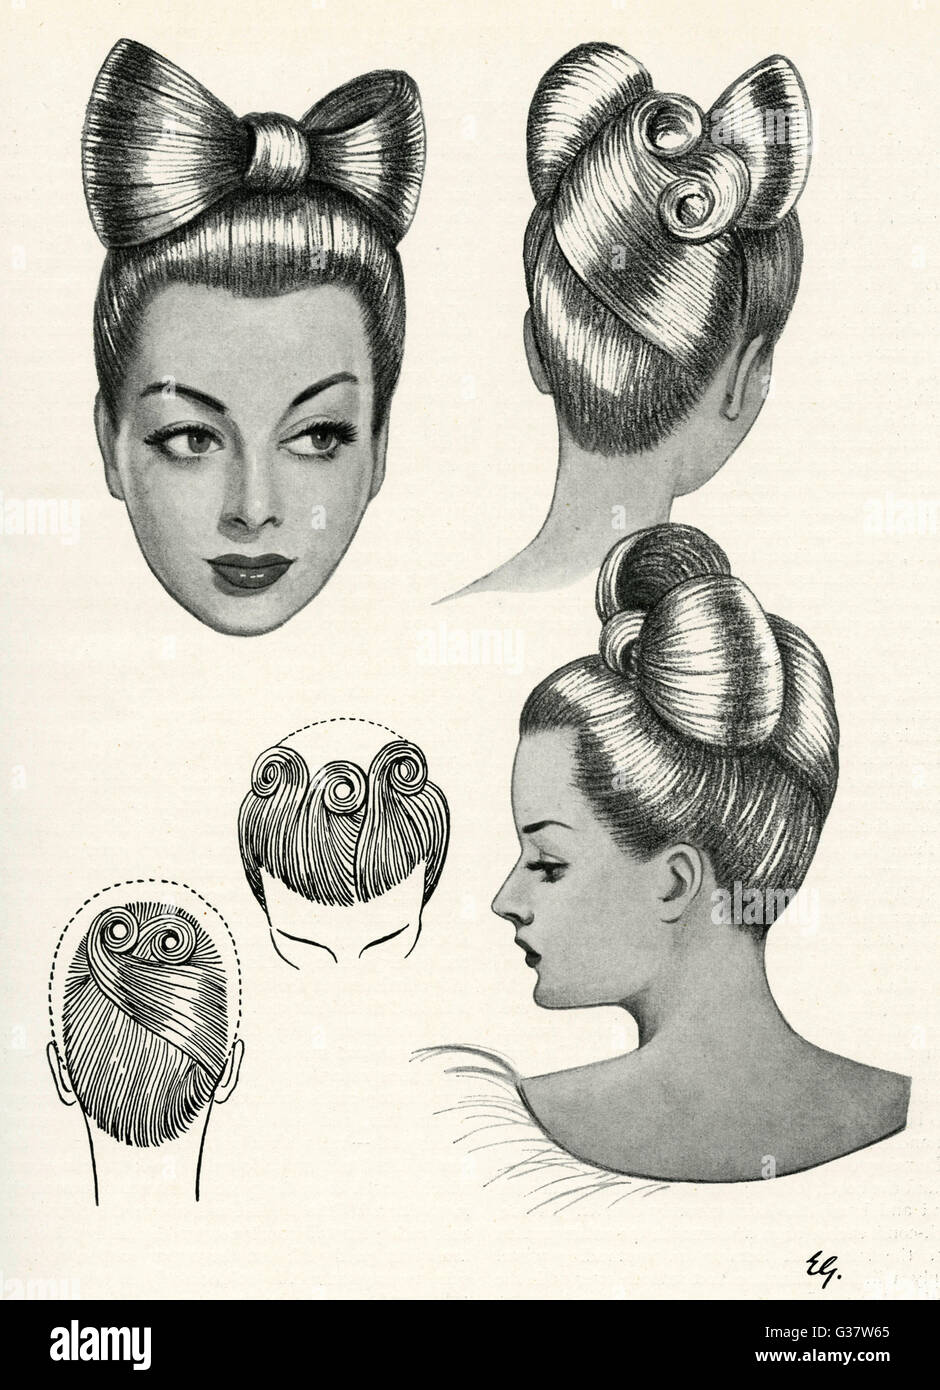 1940s hairstyle - Bow Stock Photo